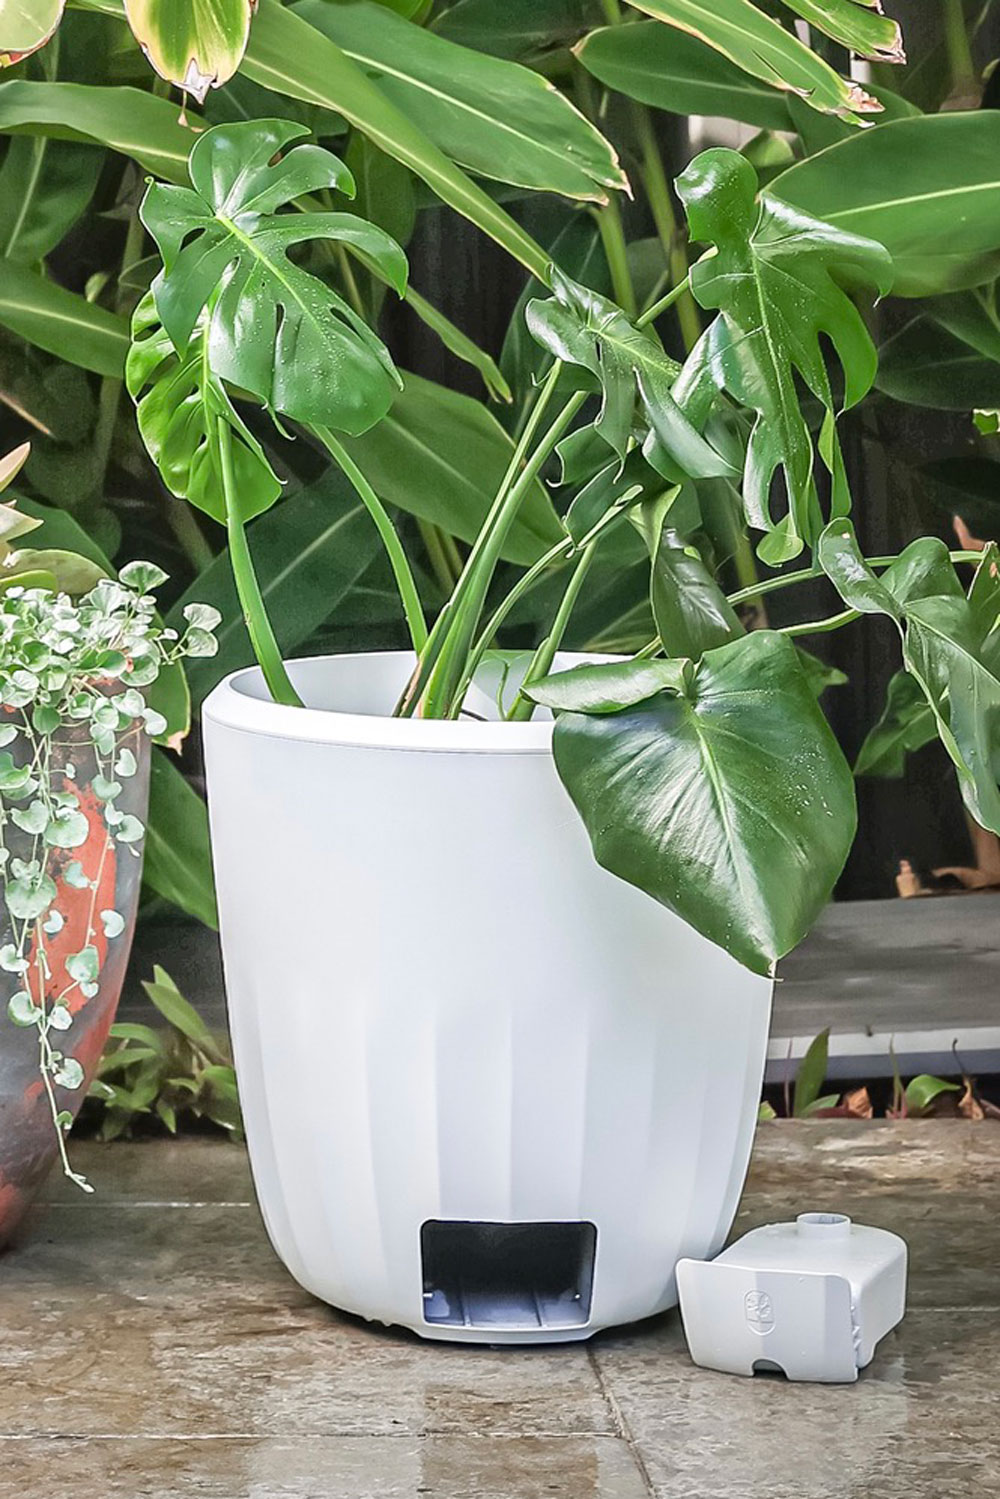 mum's game-changing plant pot takes the guesswork out of watering plants